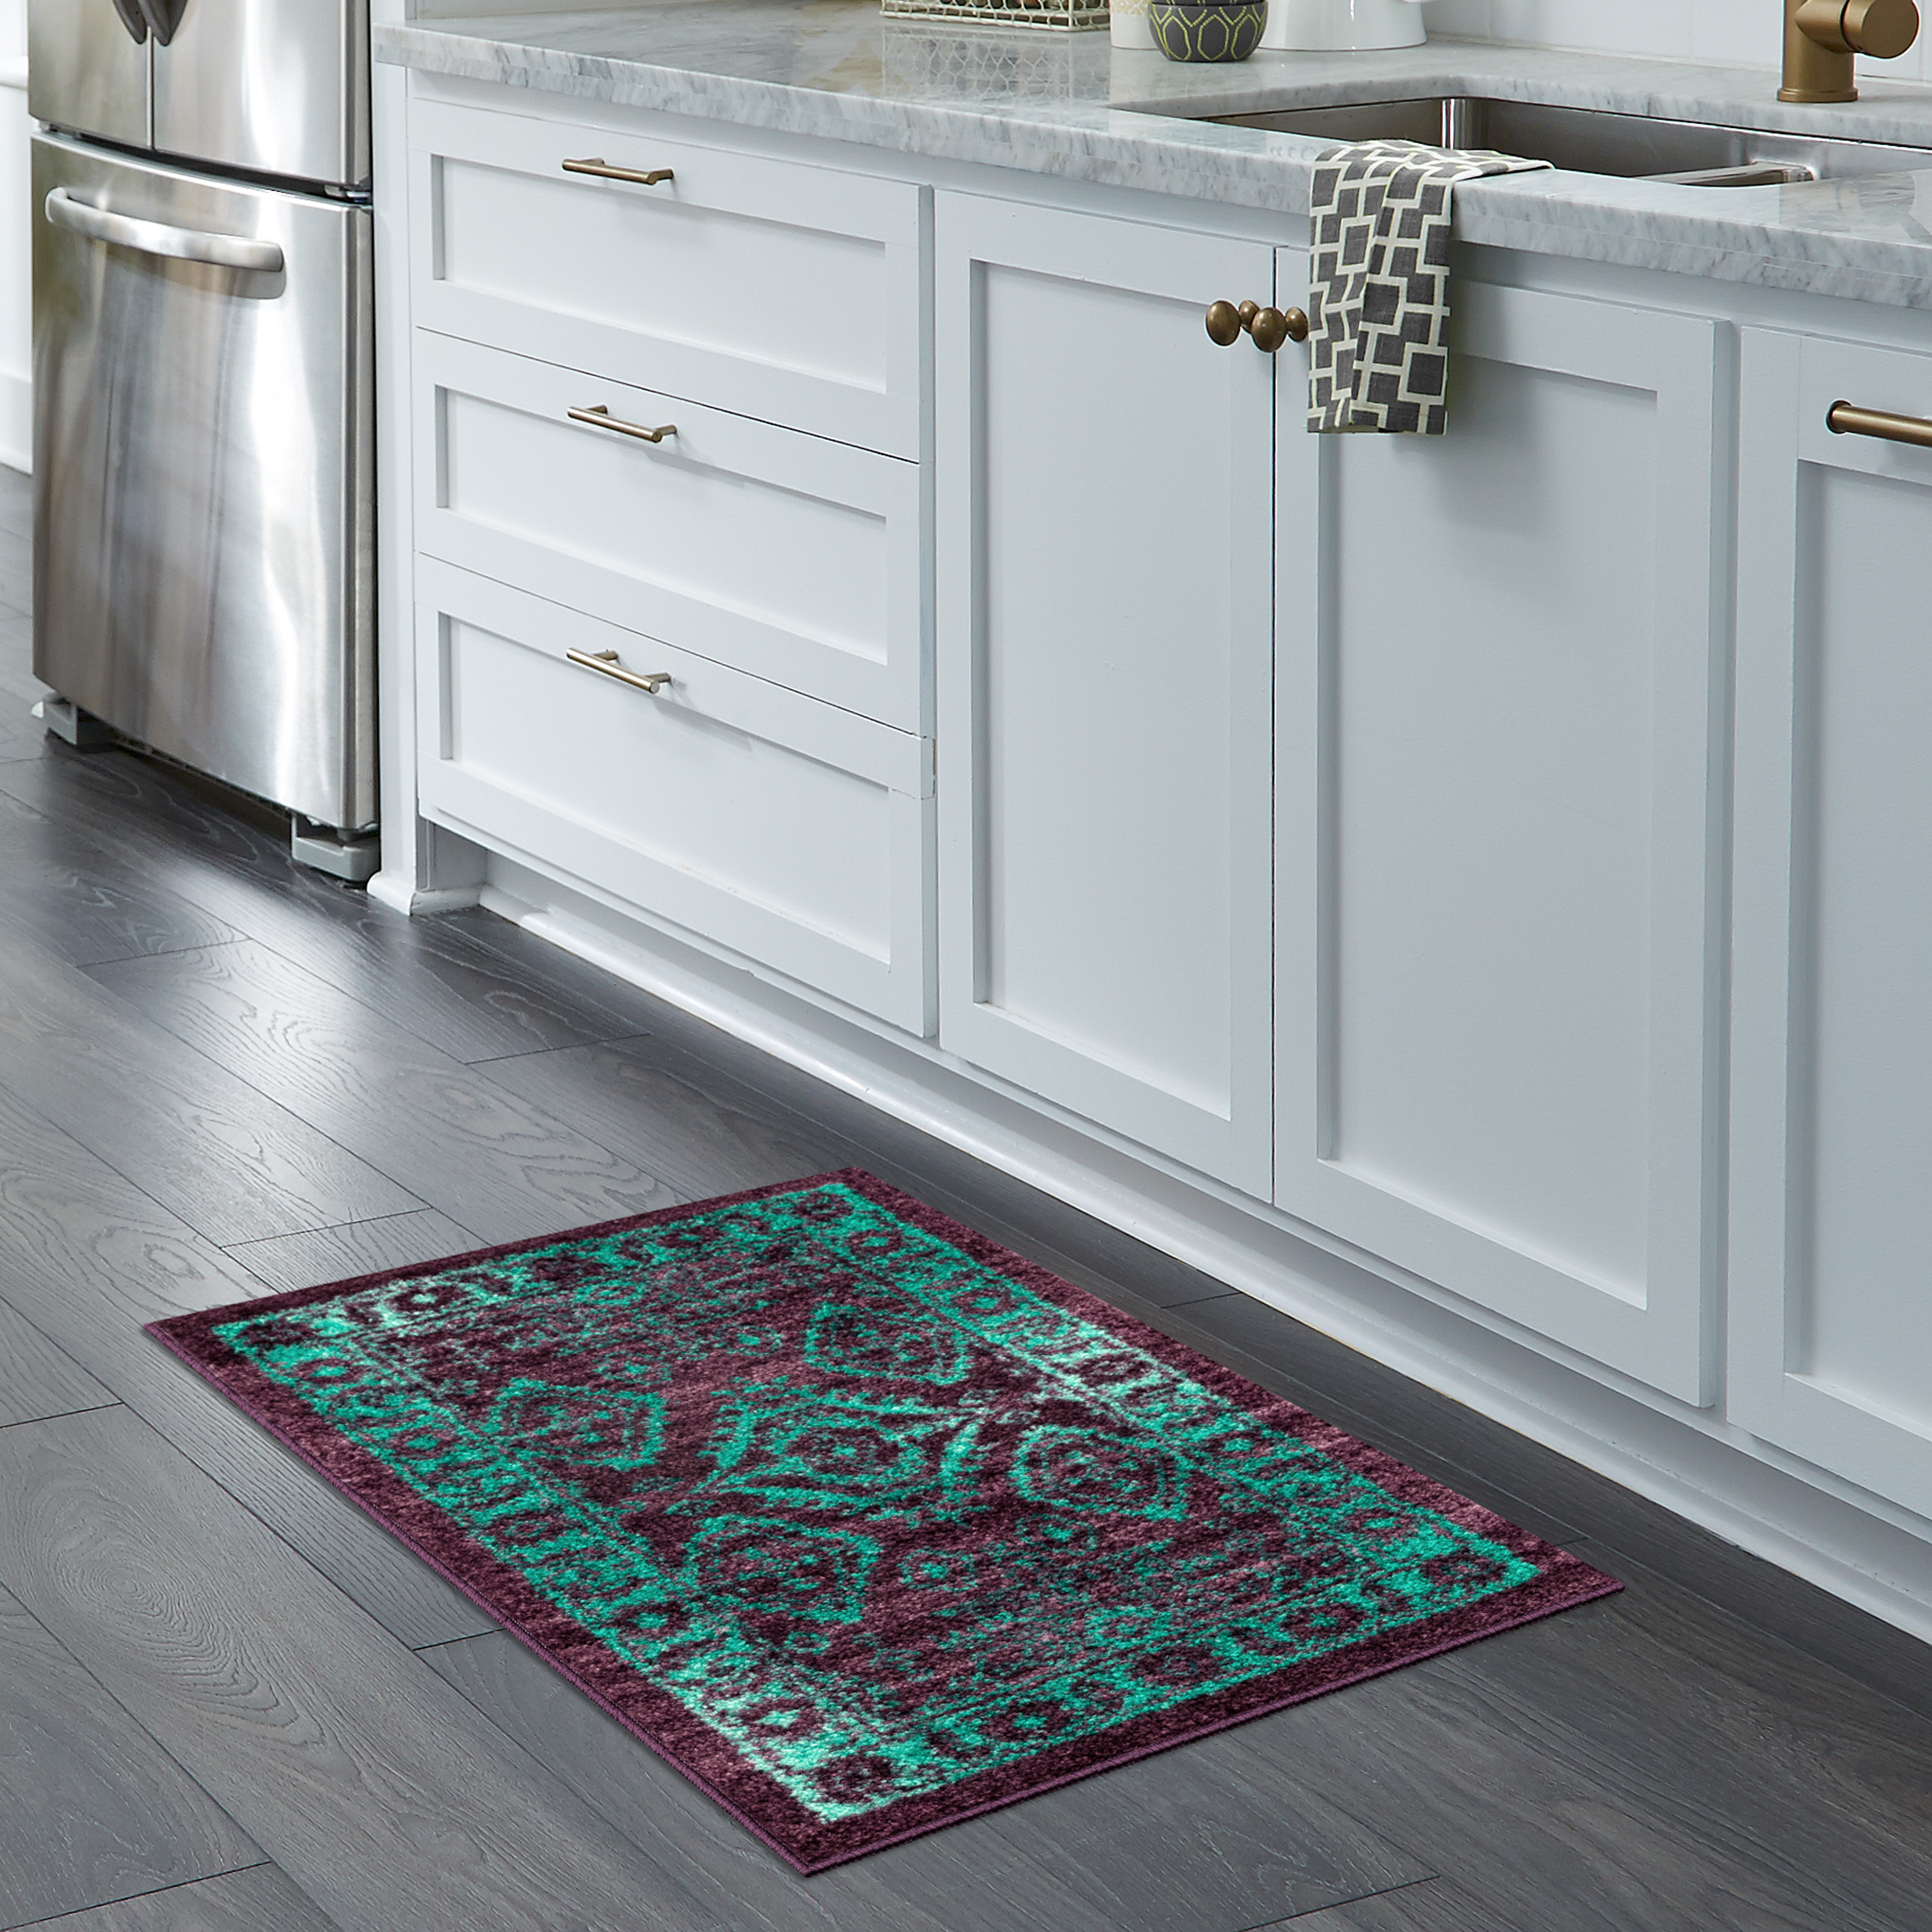 Maples Rugs Global Arya Indoor Entryway Accent Rug, Plum|Spa Green, 1'8"x2'10" - image 2 of 6